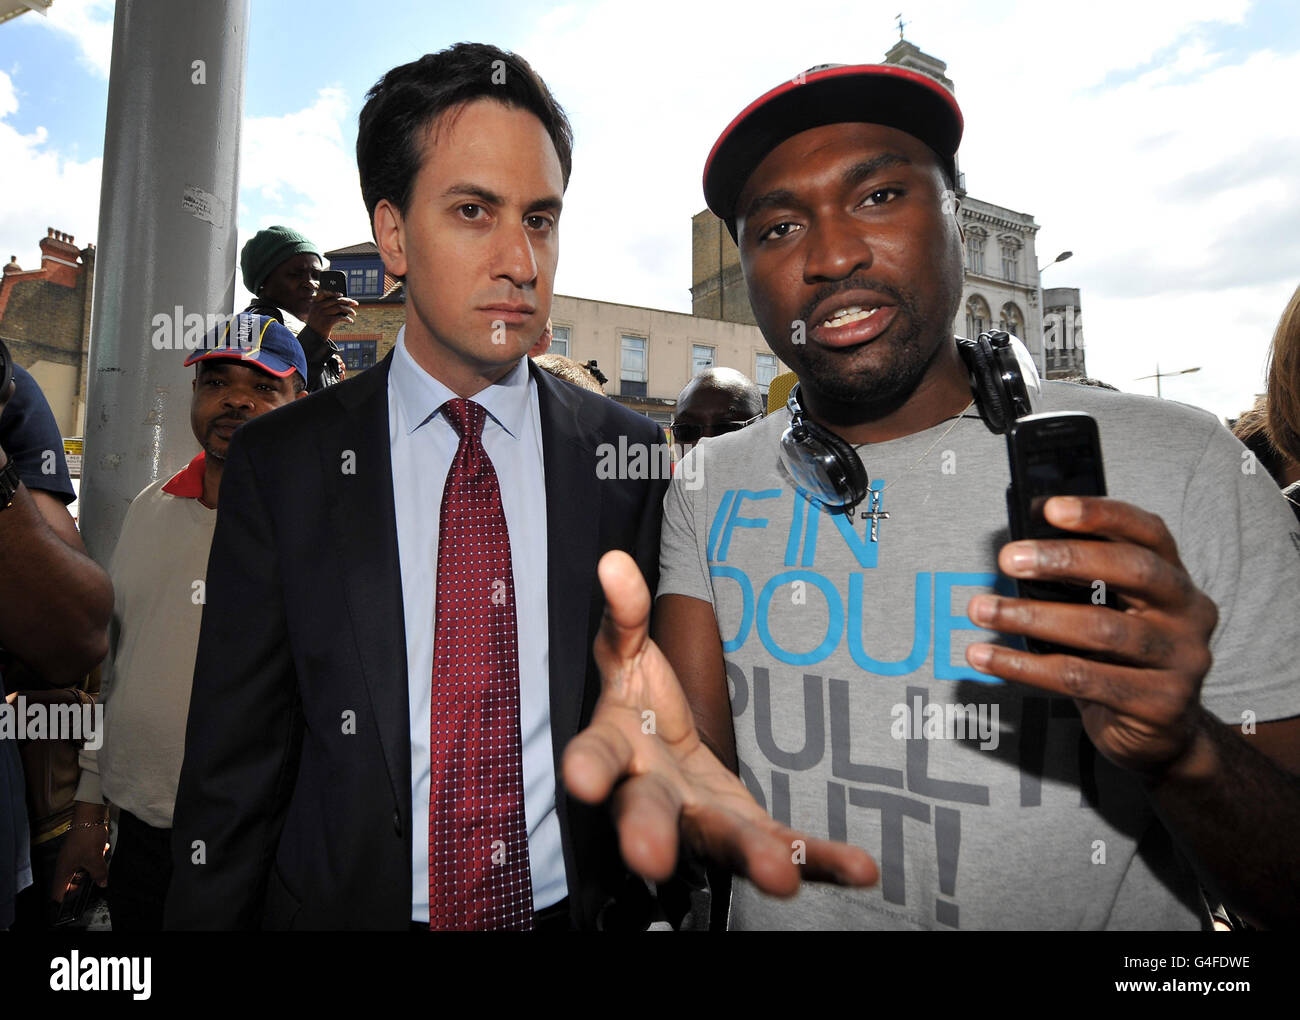 Labour leader Ed Miliband (left) speaks with Stafford Blake from Peckham during a visit to Peckham in south London, where rioting took place last night. Stock Photo